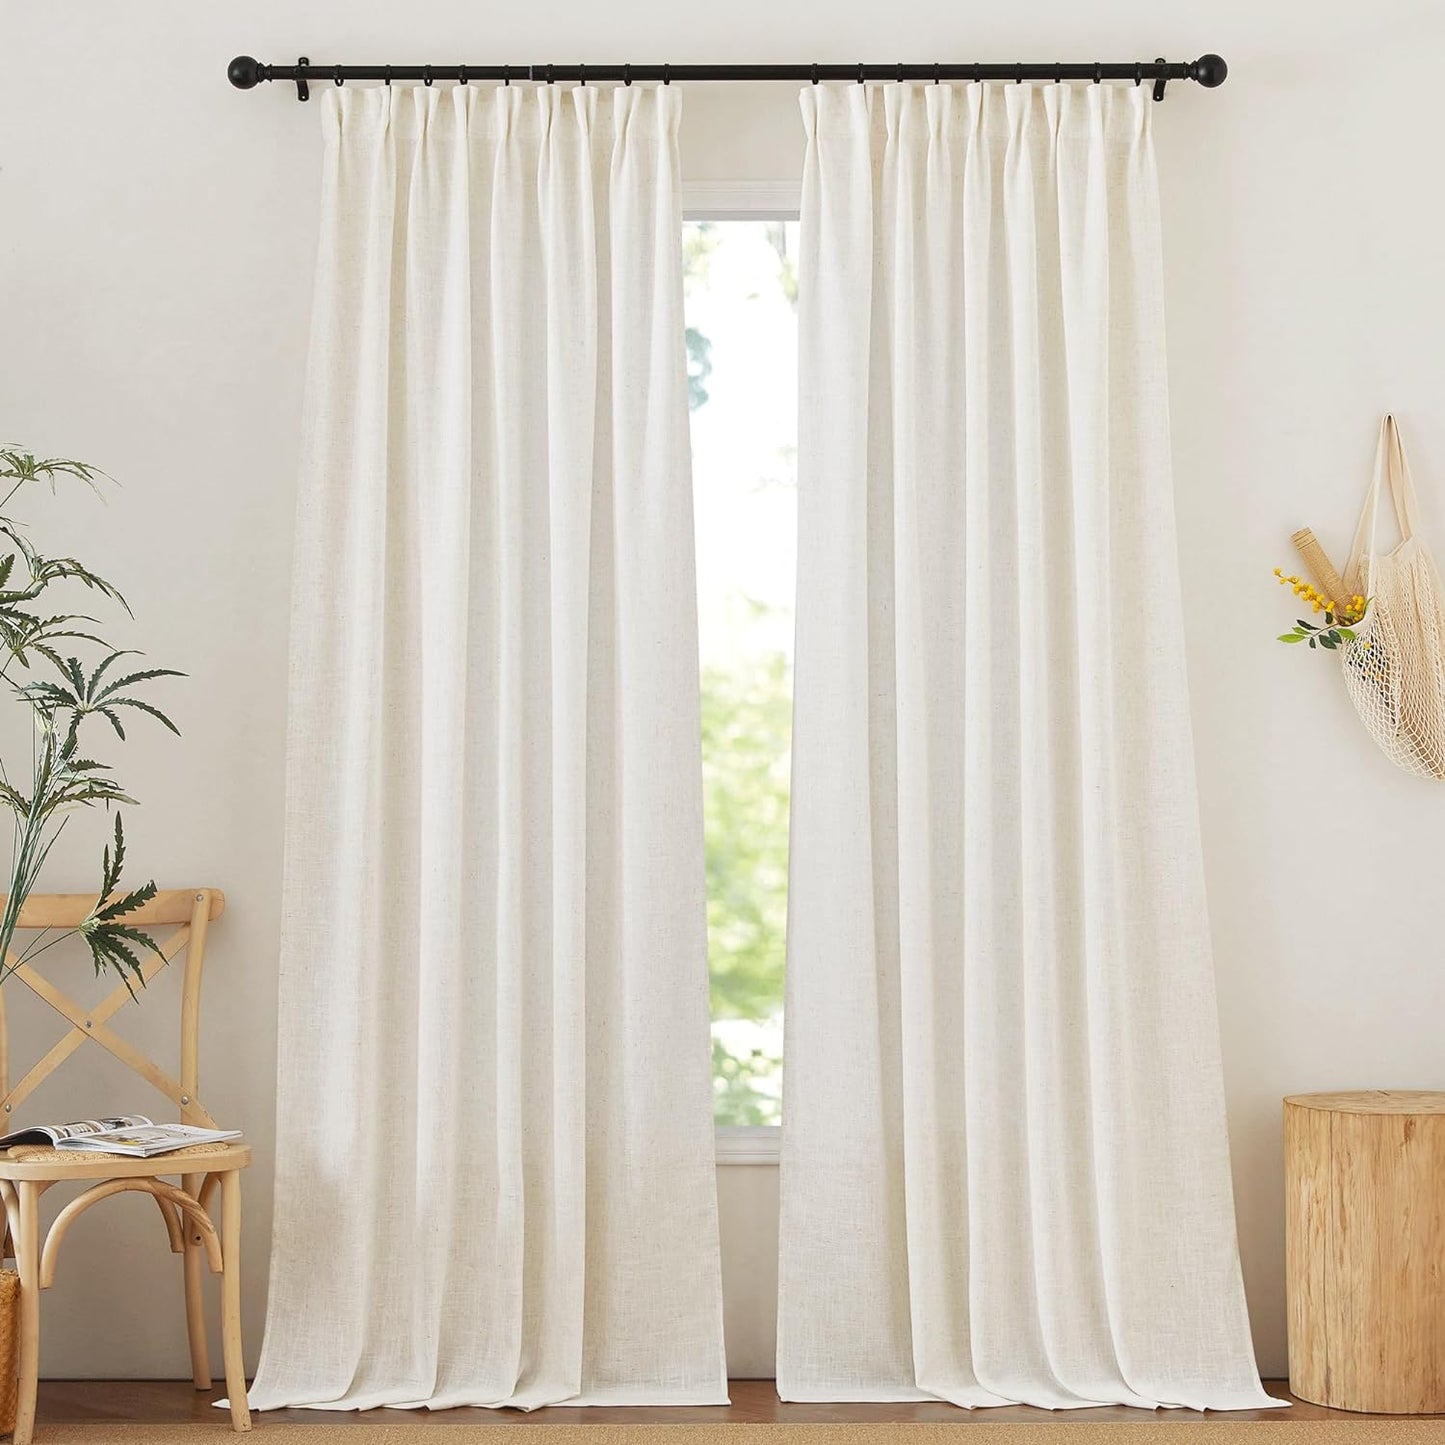 NICETOWN Linen Textured Curtain for Bedroom/Living Room Thermal Insulated Back Tab Linen Look Curtain Drapes Soft Rich Material Light Reducing Drape Panels for Window, 2 Panels, 52 X 84 Inch, Linen  NICETOWN Linen W52 X L120 